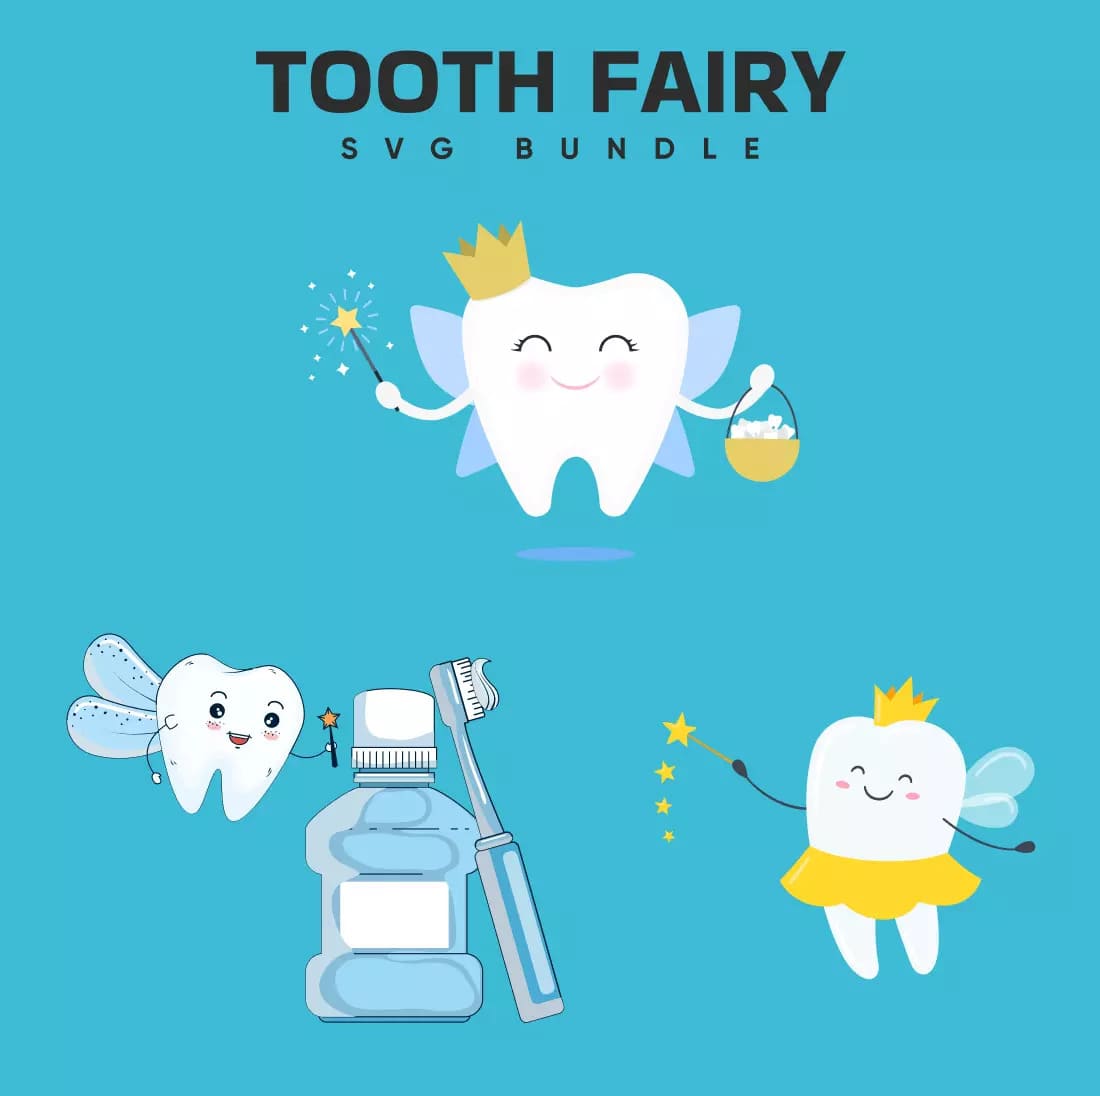 Tooth Fairy SVG Bundle Preview.